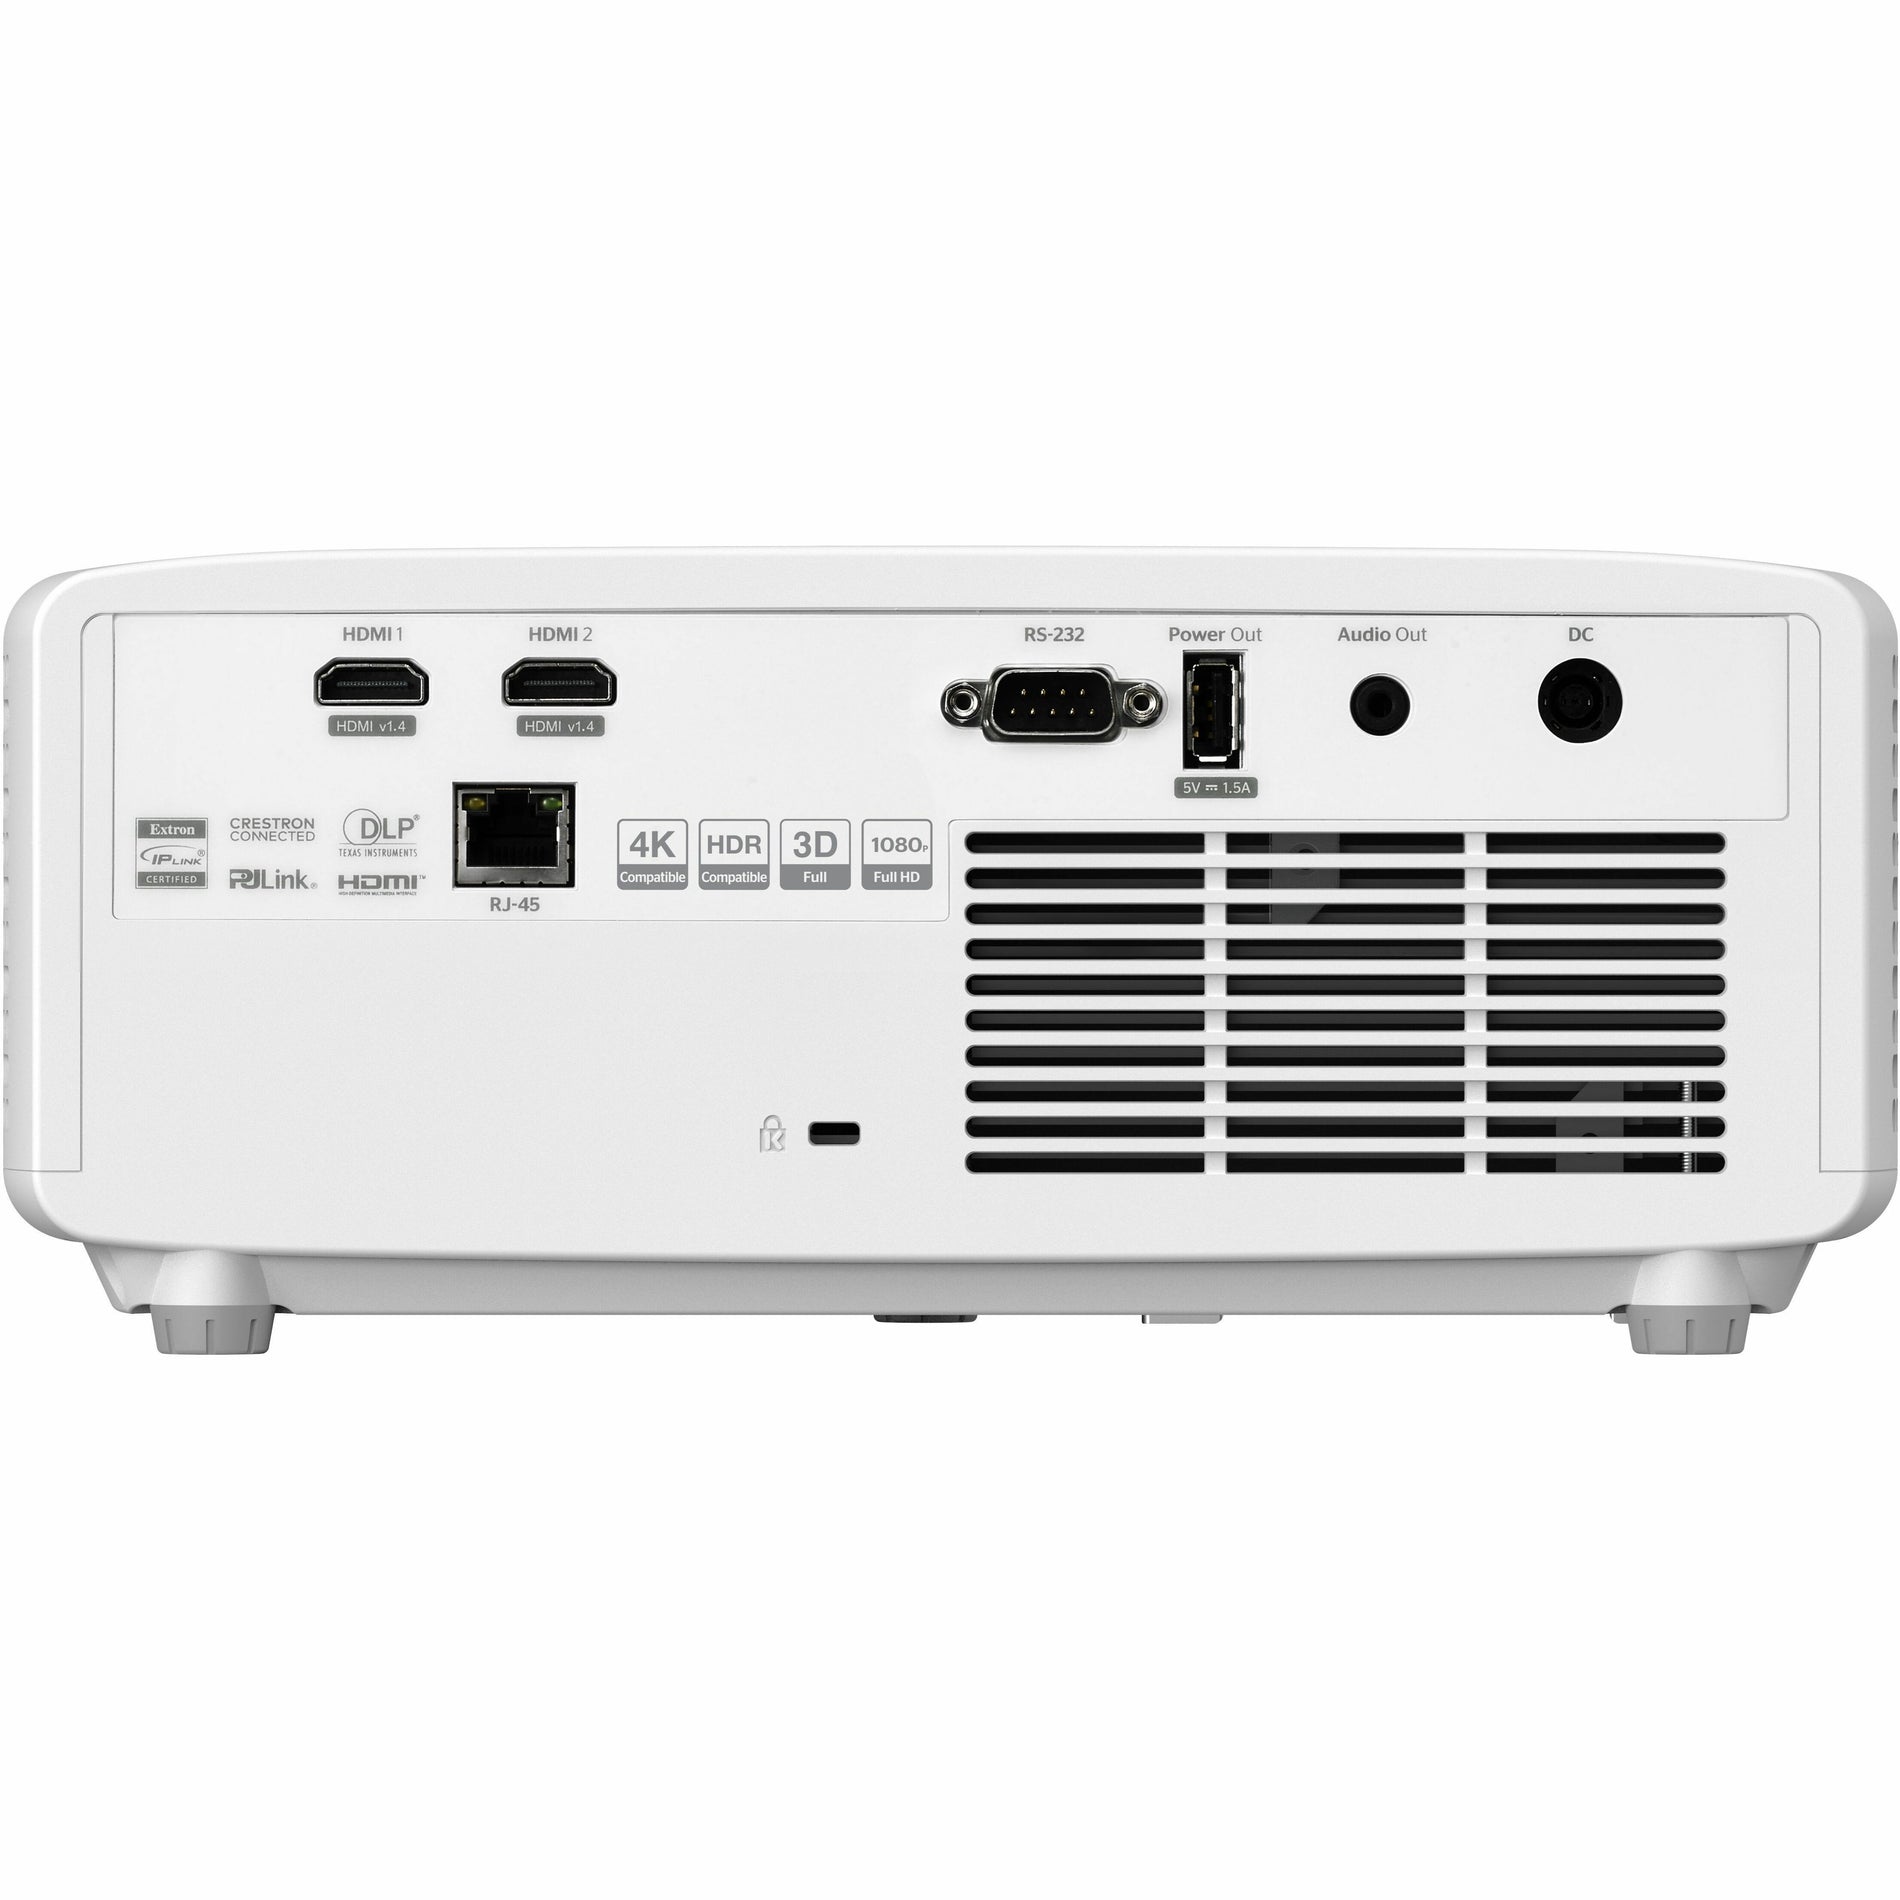 Optoma ZH450ST DLP Projector - Short Throw, Full HD, Laser, 4200 lm, 16:9